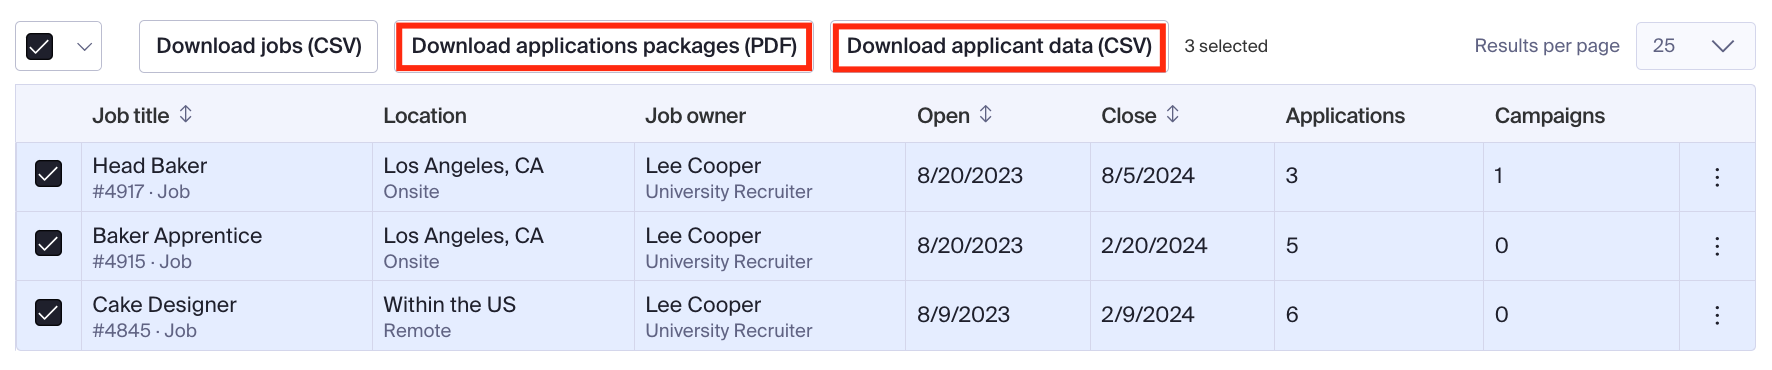 Download applicant packages.png